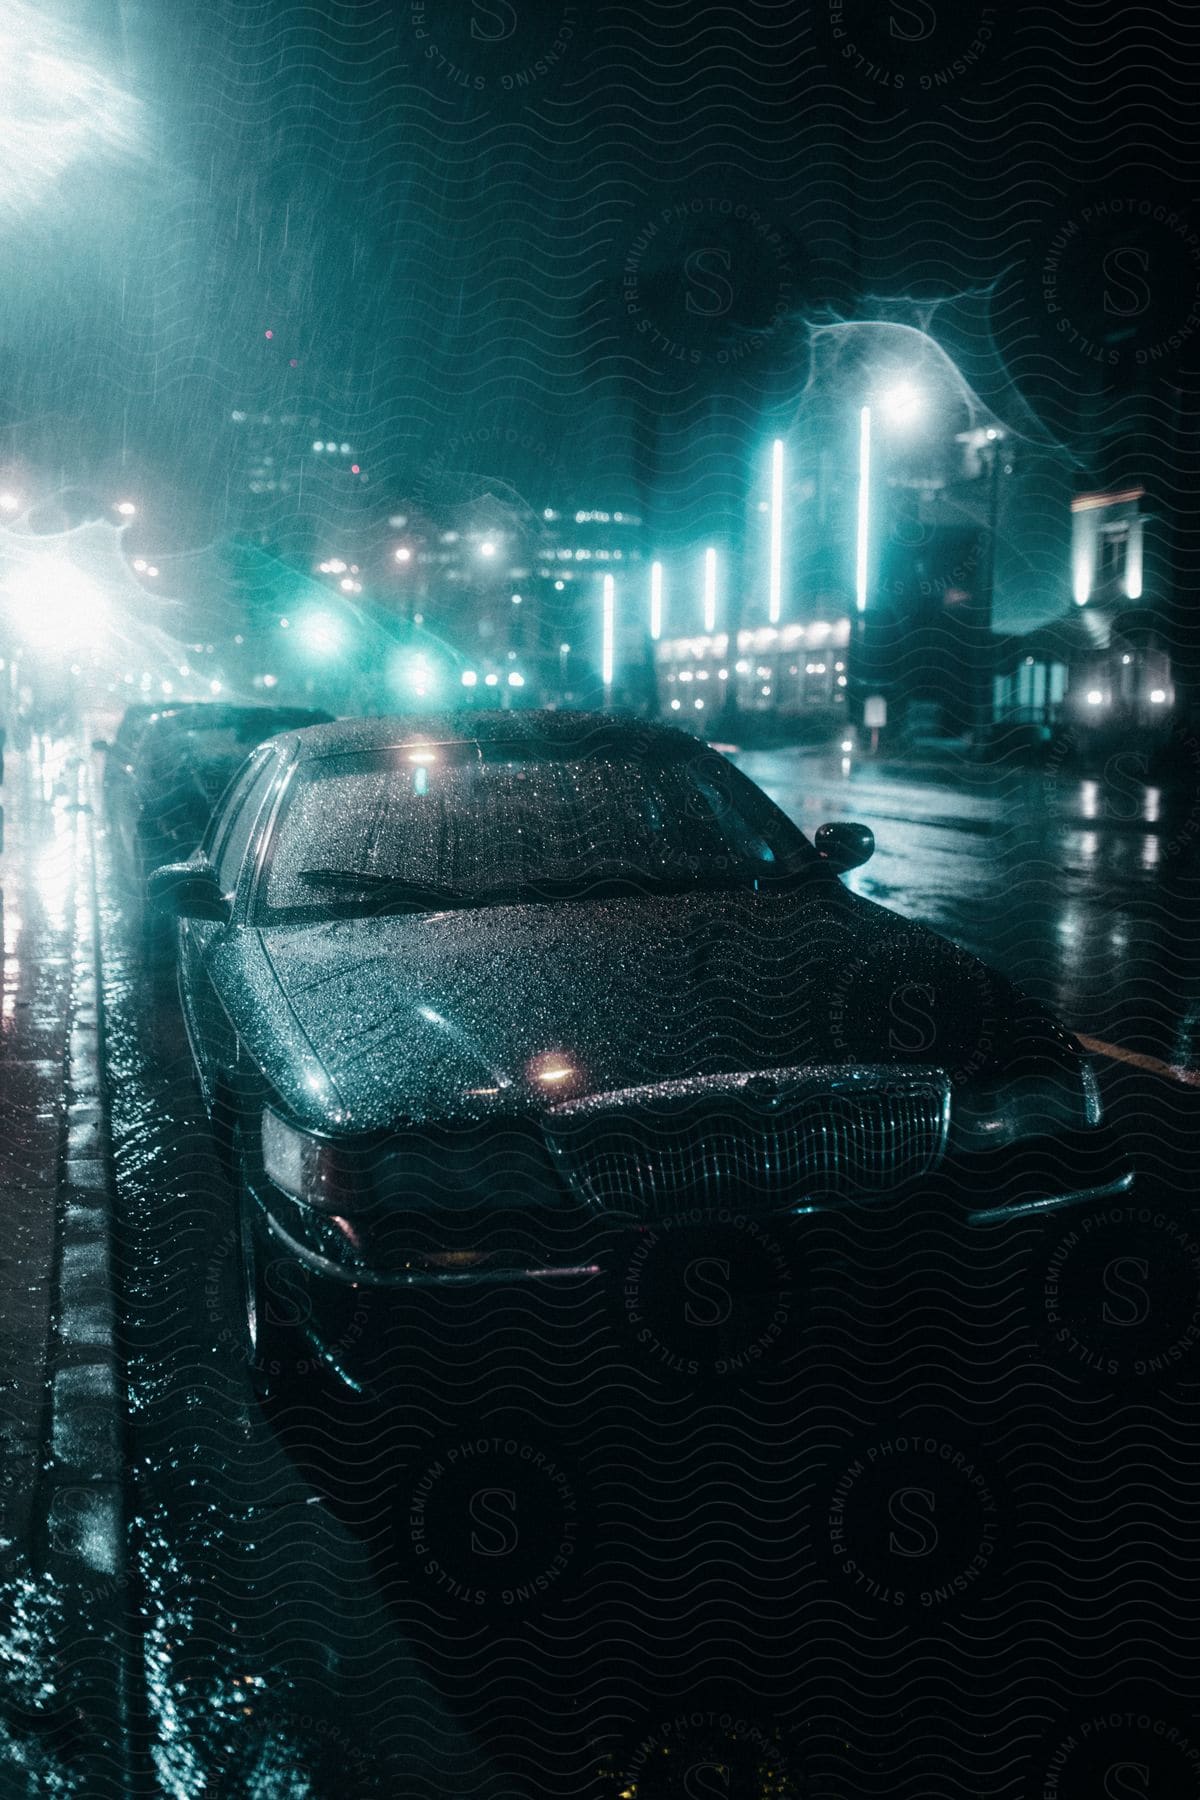 A parked car in a rainy city at night